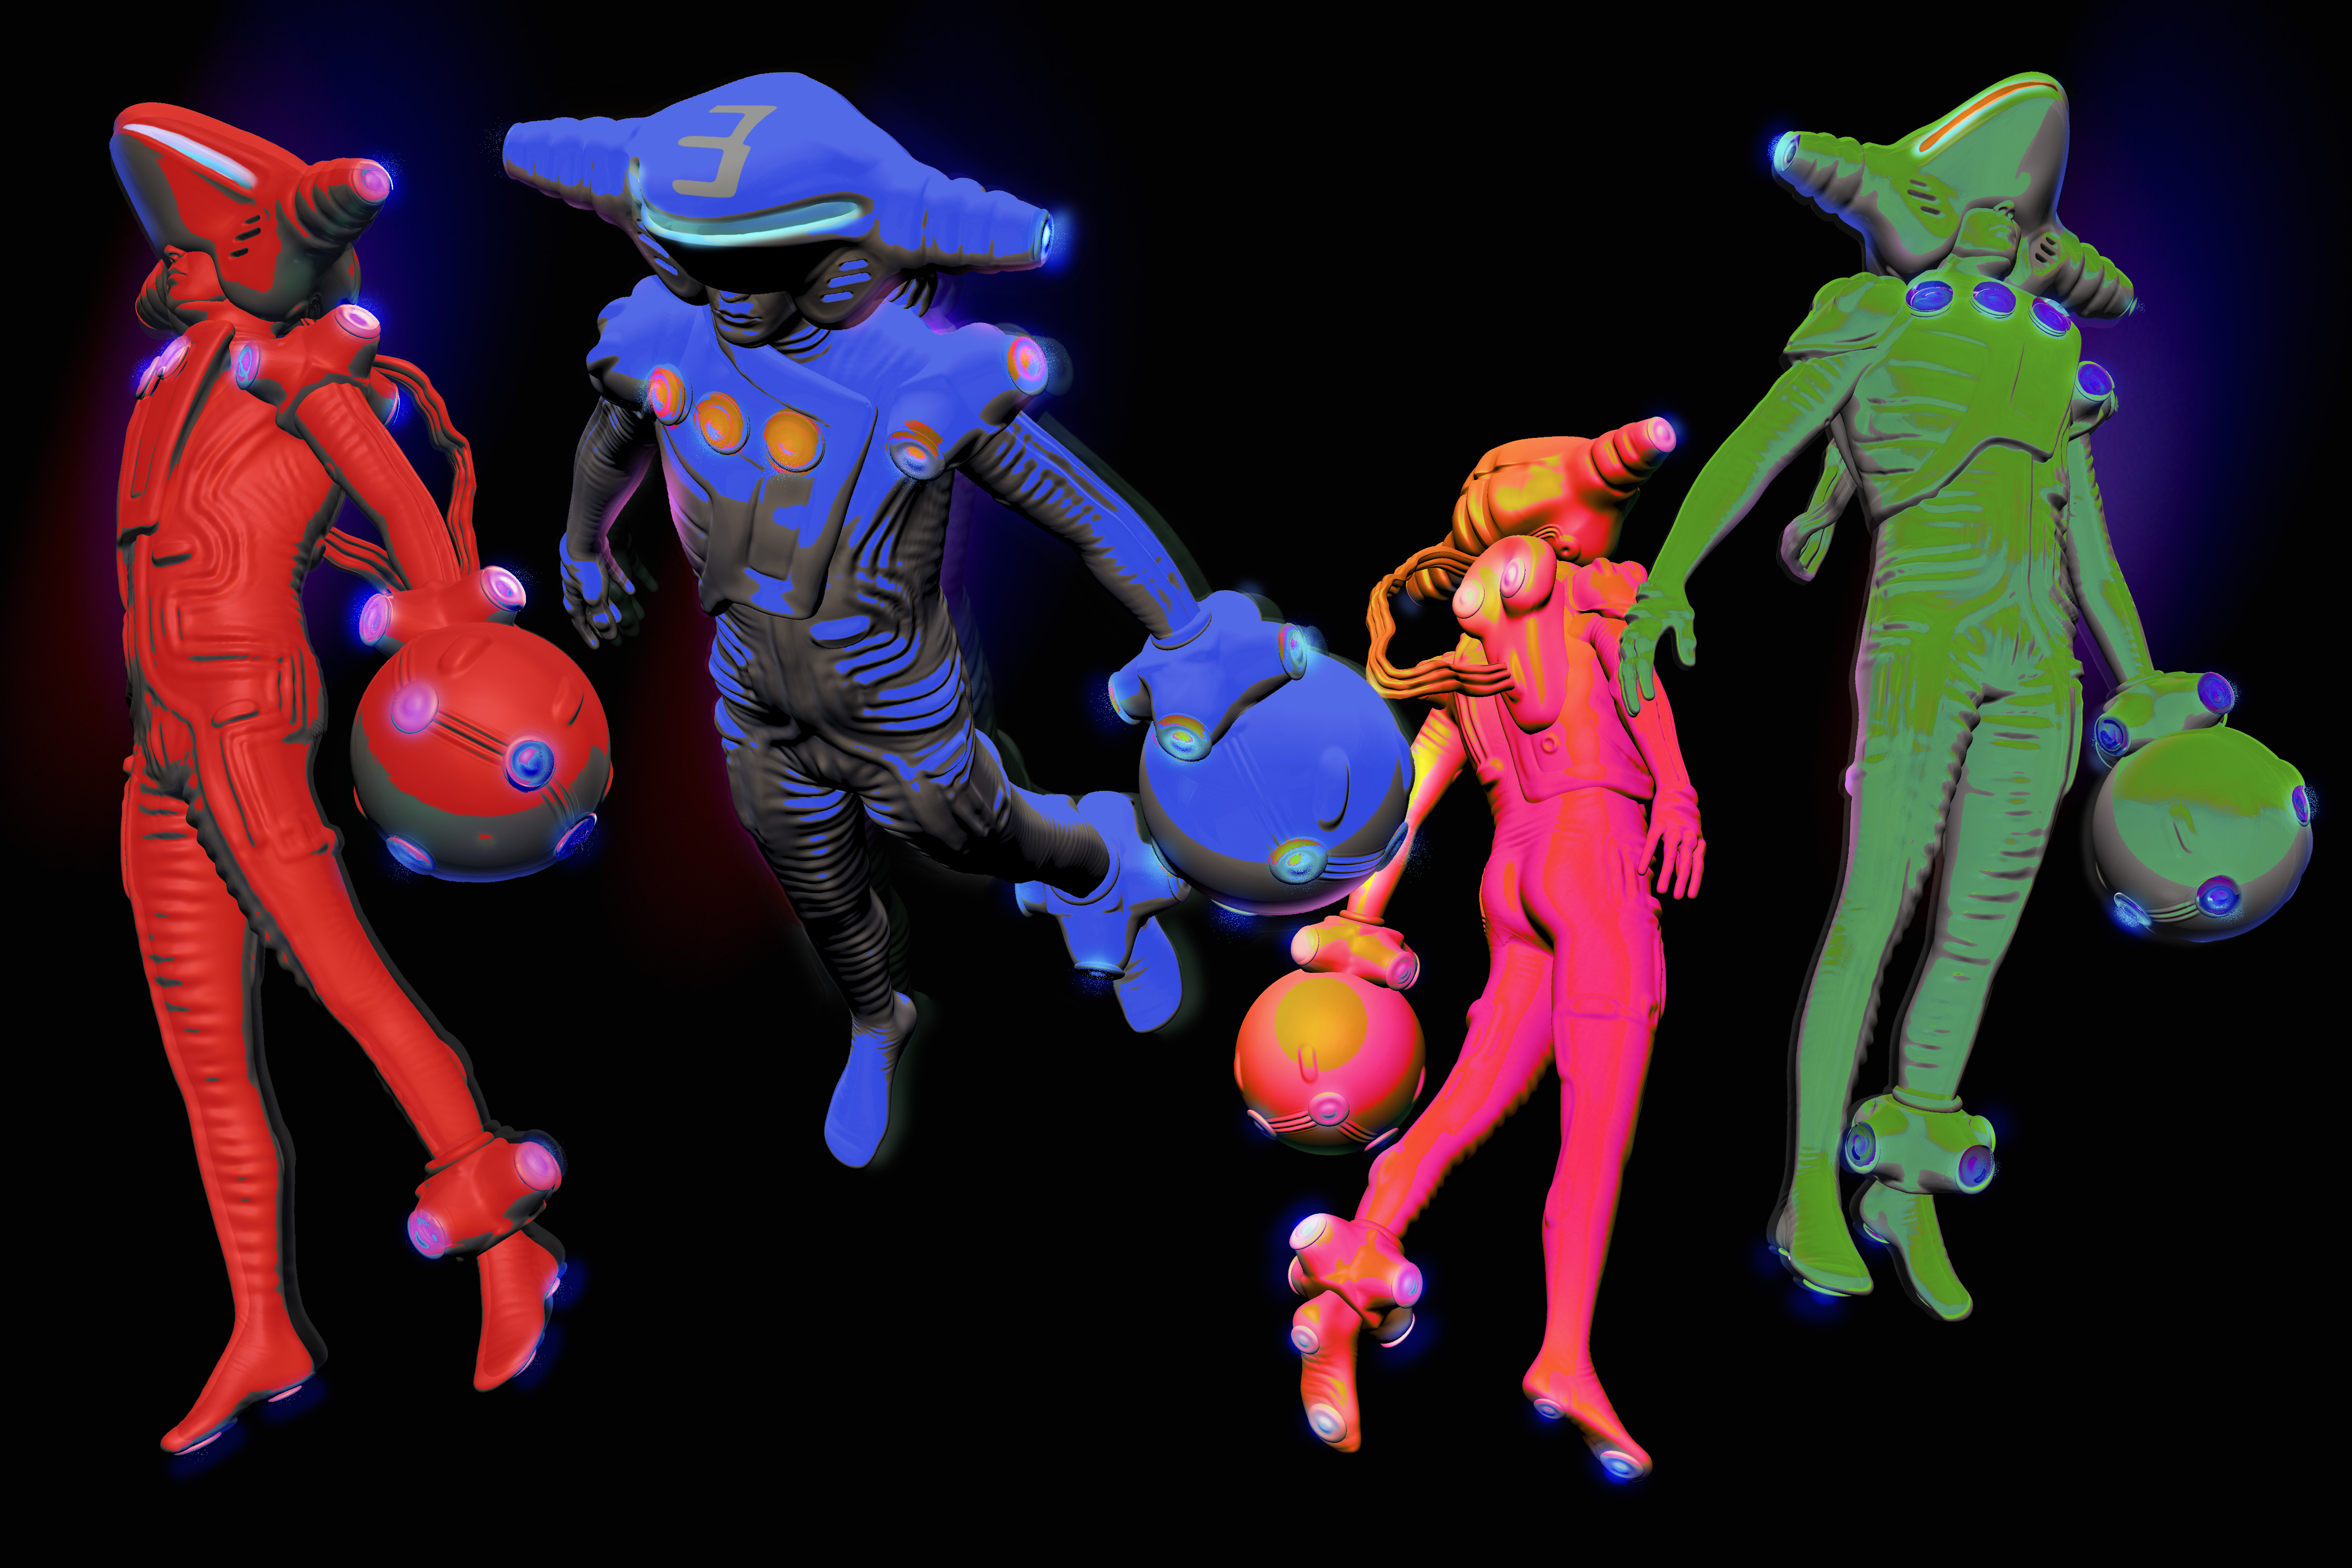 An illustration shows four virtual reality bodysuits, with each player in a different color. Each suit contains a large orb on the player’s left hand.